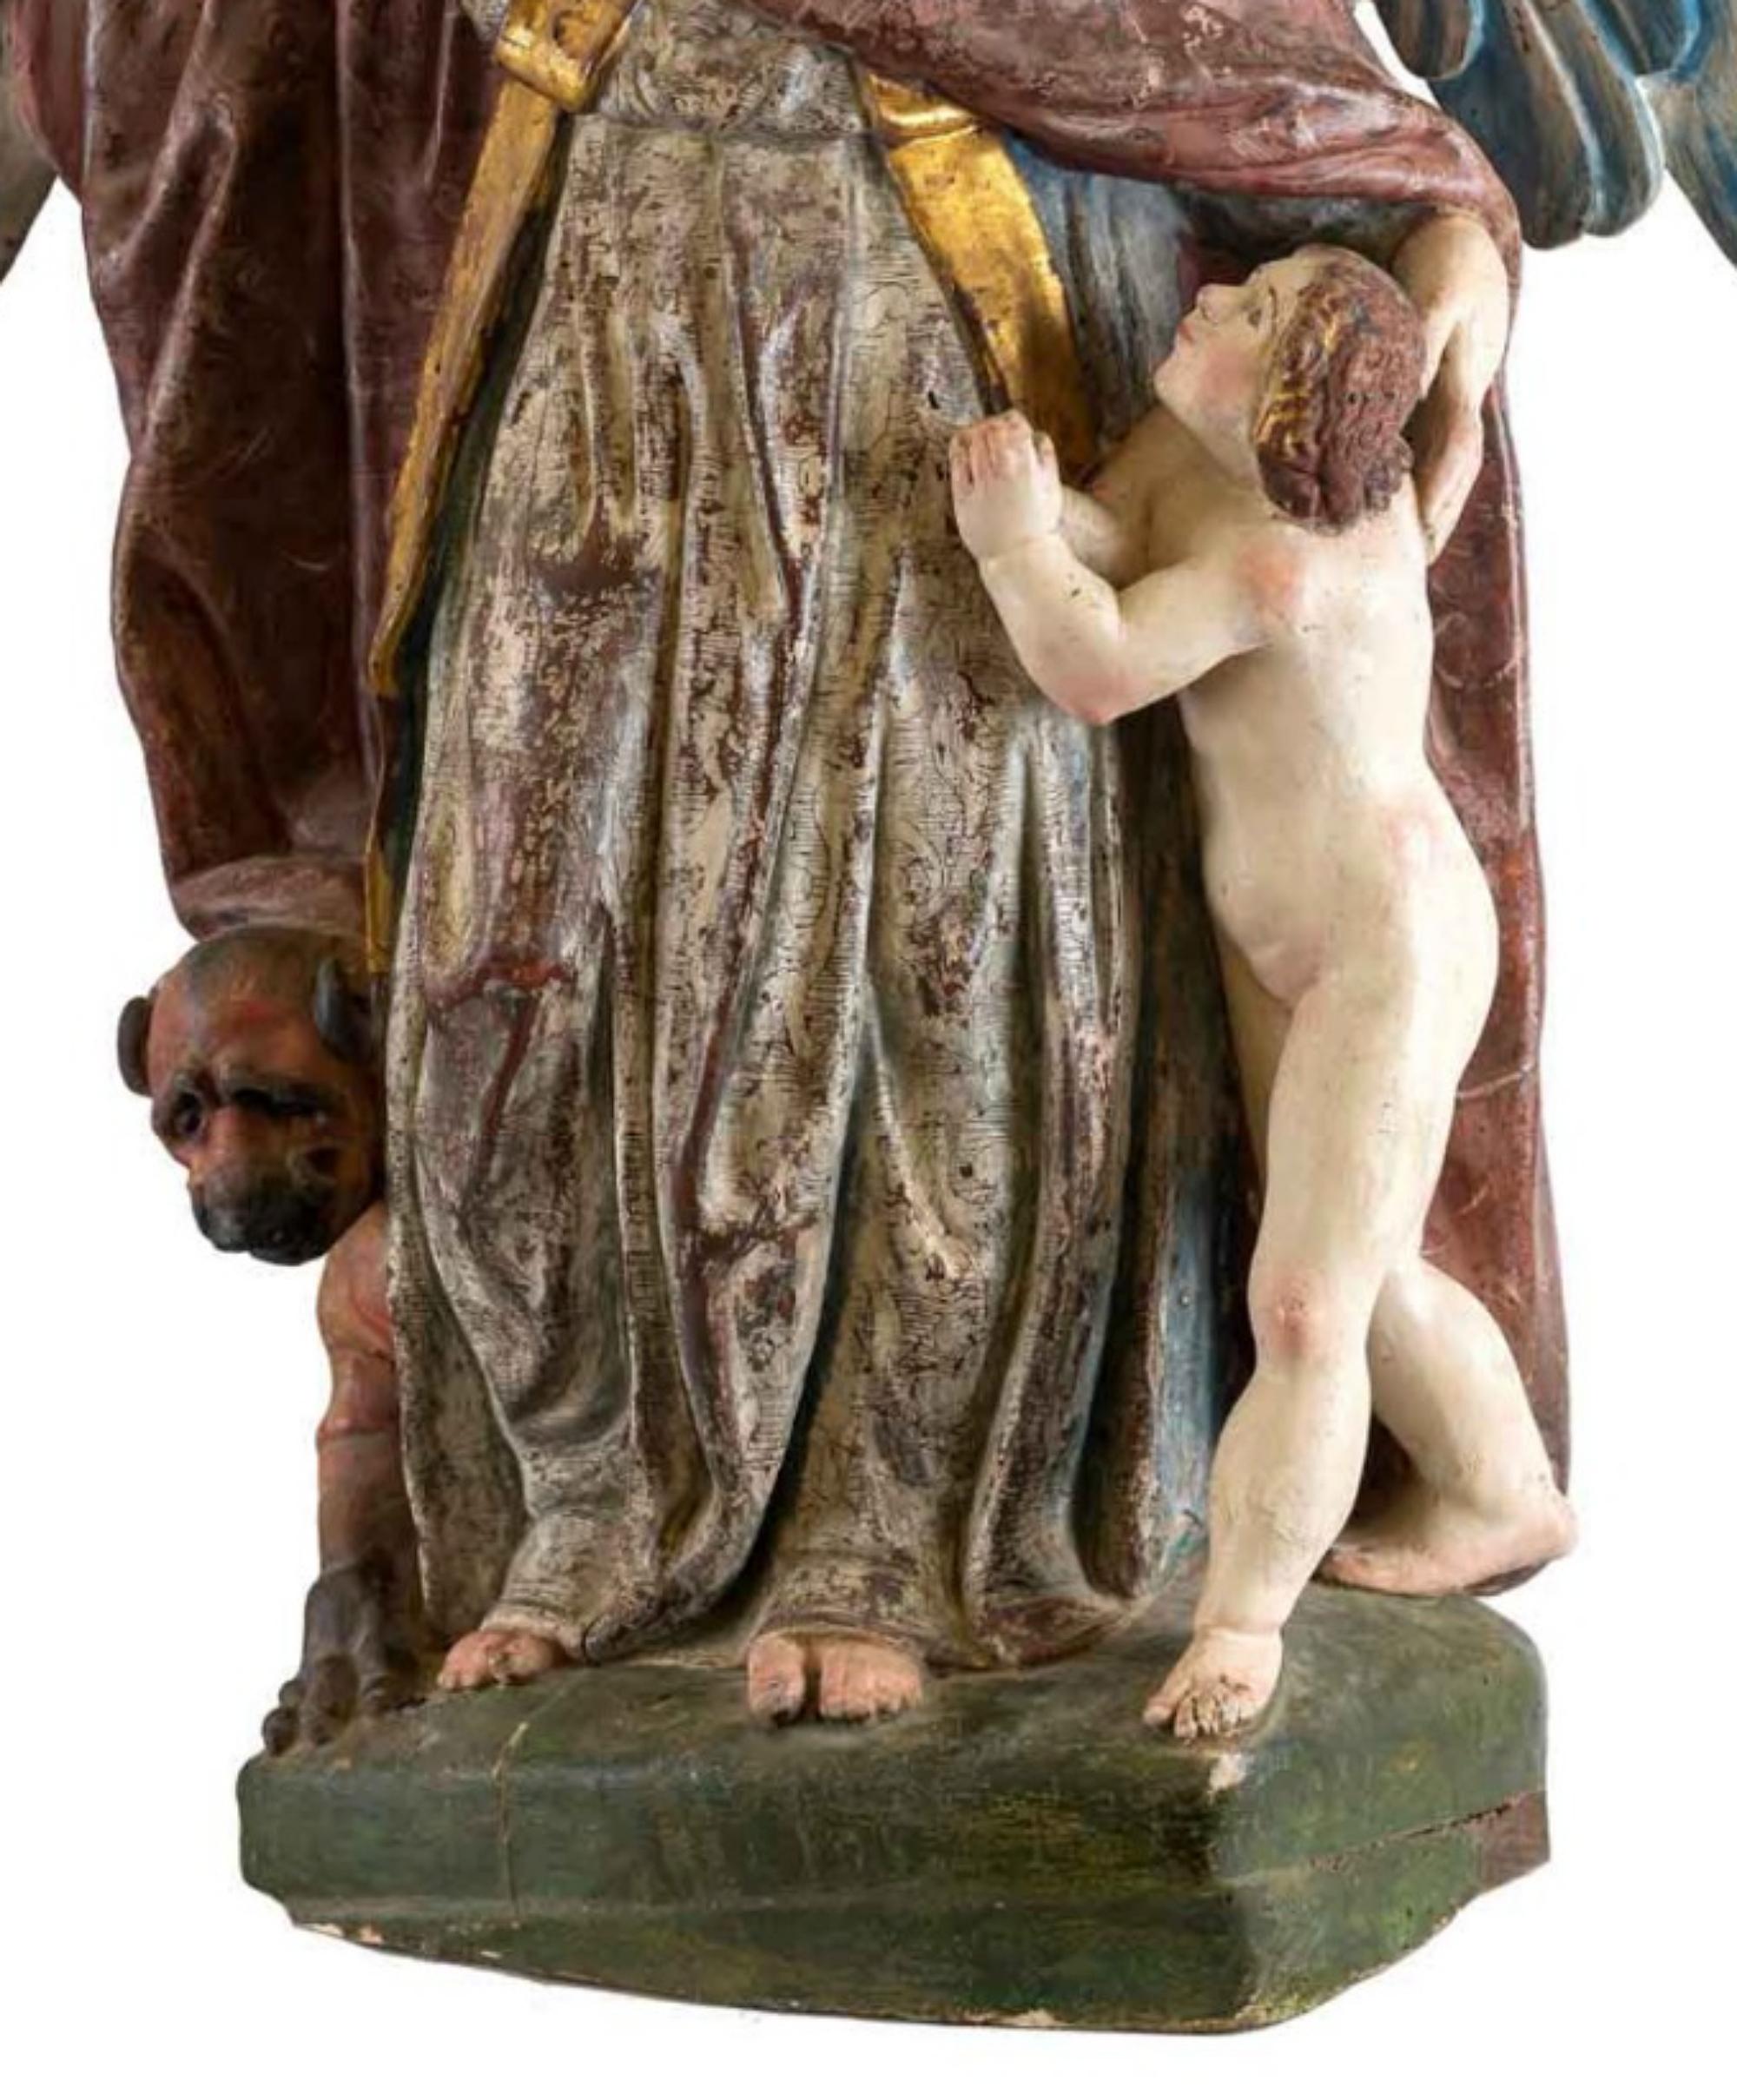 Spanish school S. XVII
Guardian angel
Polychrome wood carving.
Height: 115 cm.
Of Cantabrian origin from the city of Trasmiera. It belonged to a private chapel to which it gave its name as the Chapel of the Angel. This work, made in the second